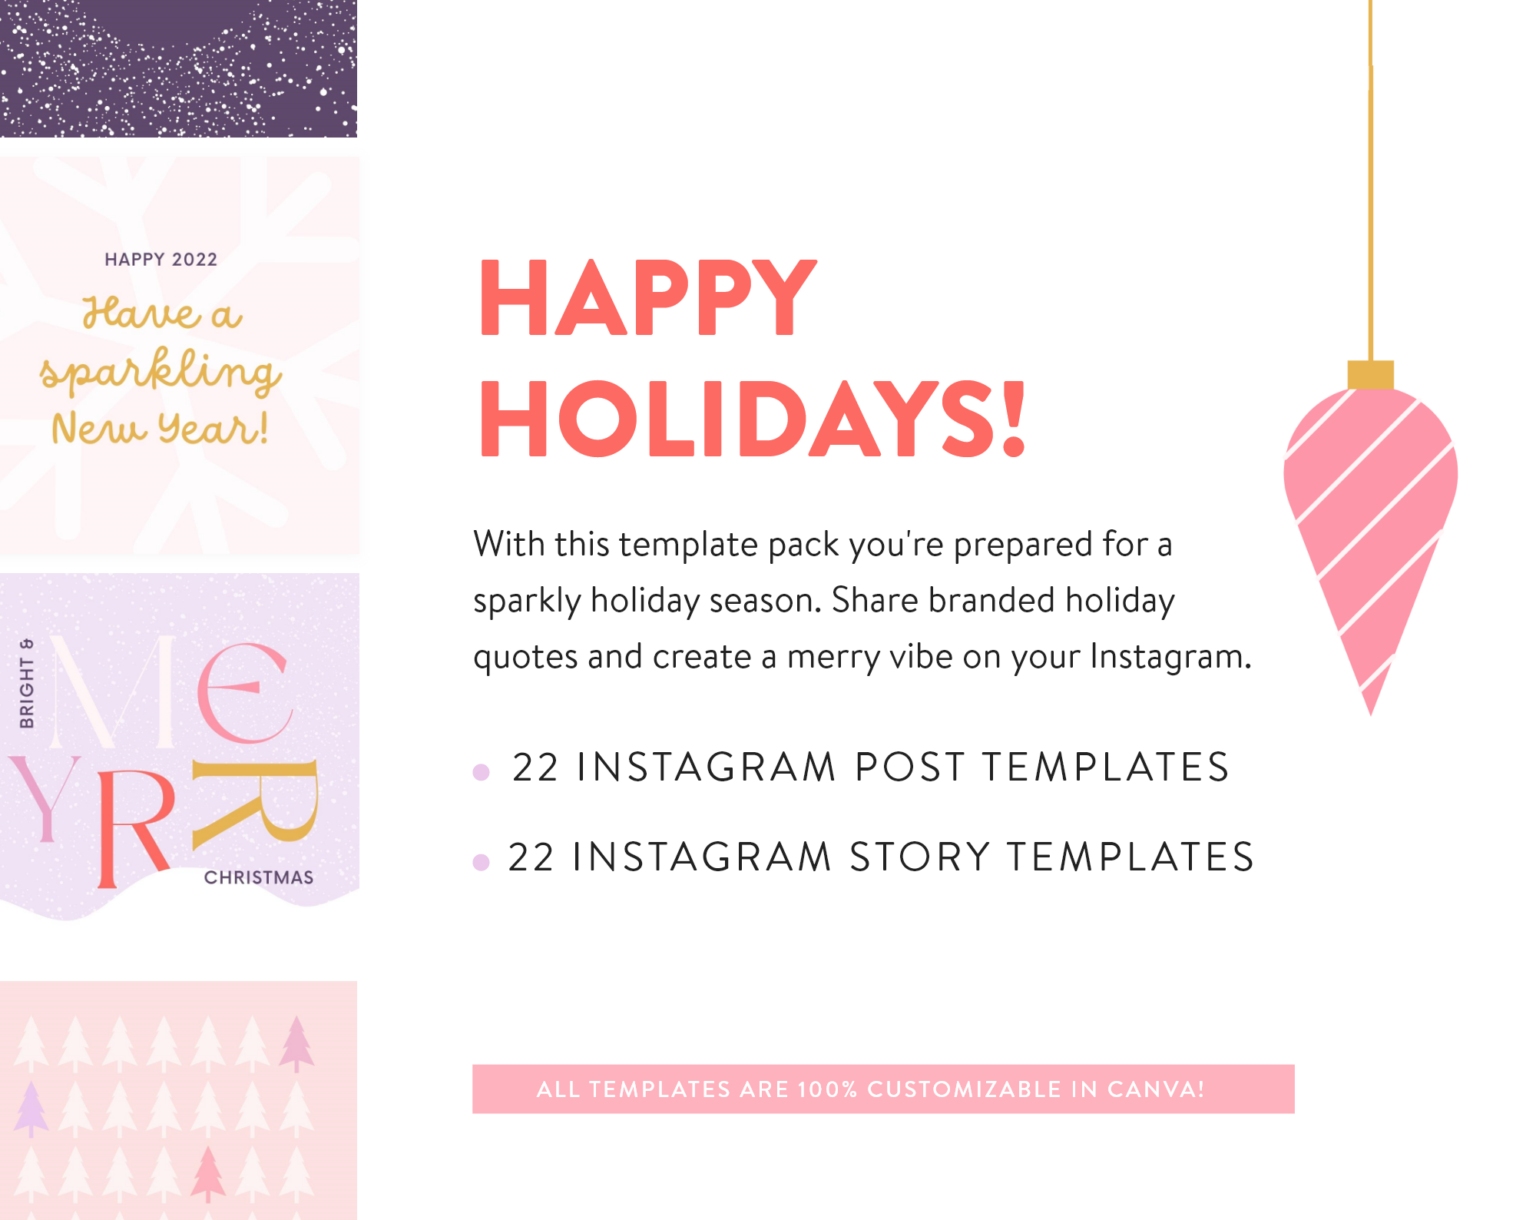 Holiday-quotes-for-instagram-template-pack-canva-whats-in